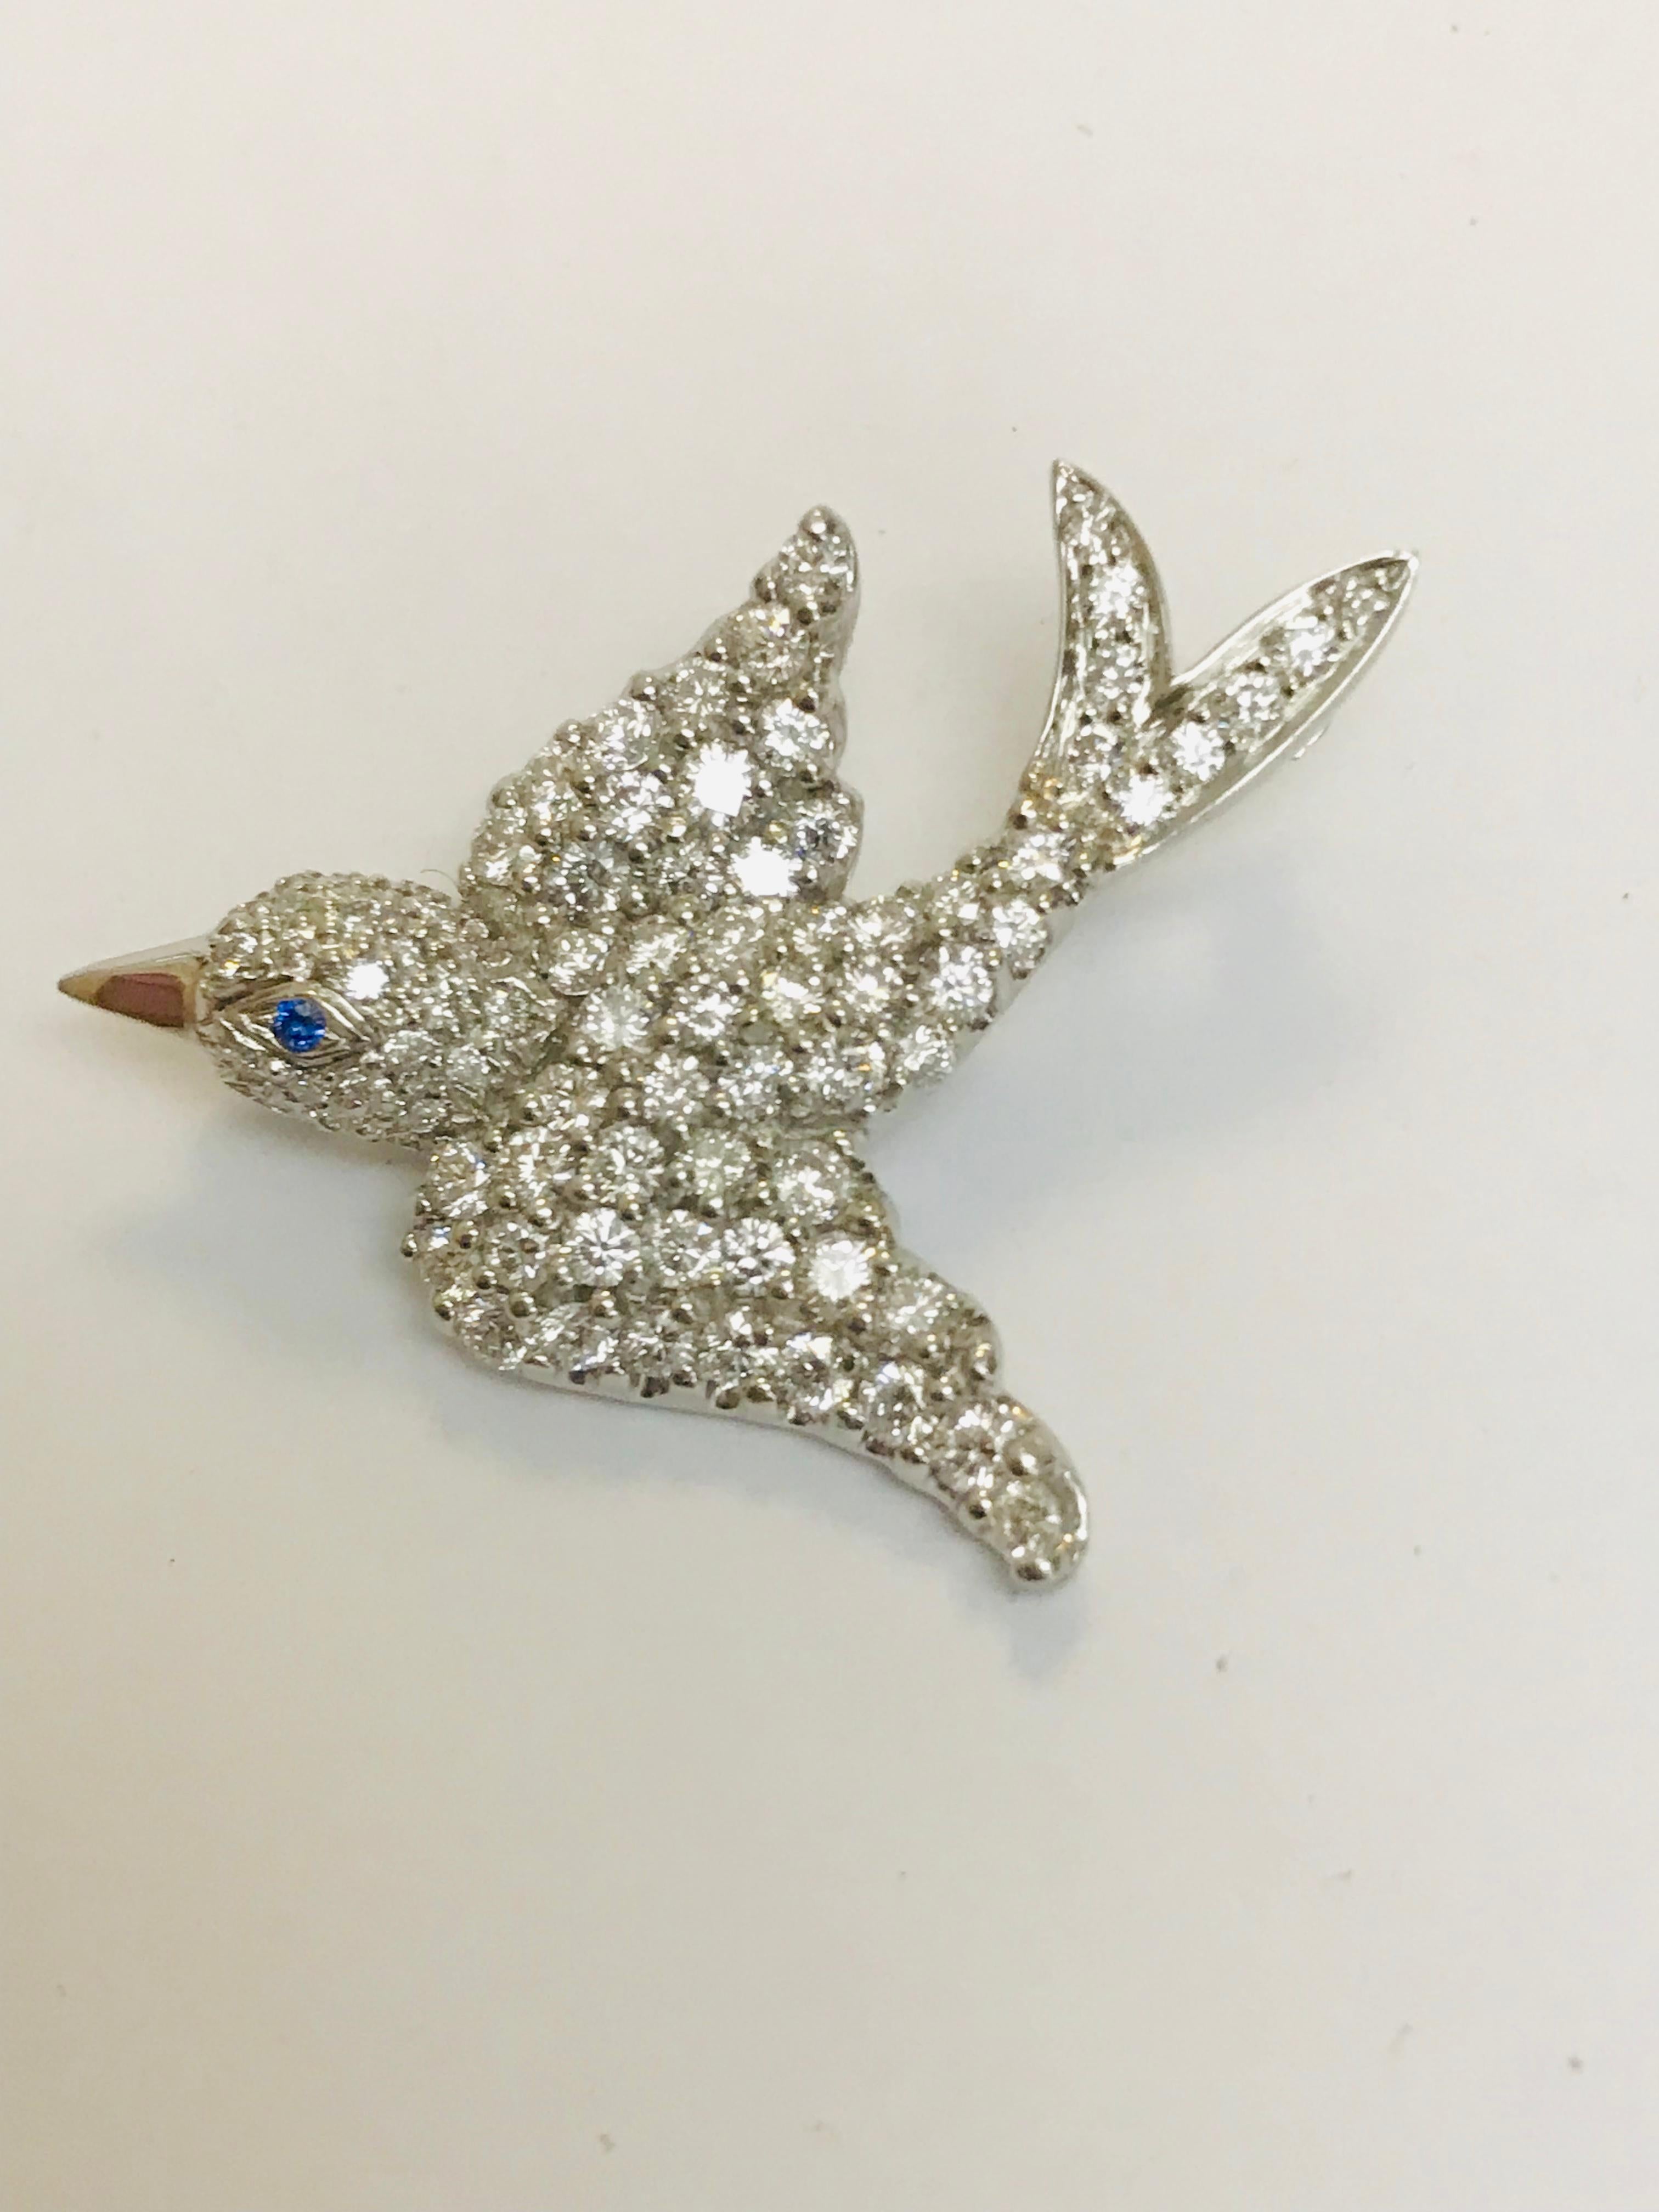 This bird in flight brooch, designed and created by Jean Vitau, is beautifully crafted in Platinum with 2.30 carats of g+ color VVS clarity diamonds. She has a light blue Sapphire for her eye. This brooch can be altered to be worn as a pendant as